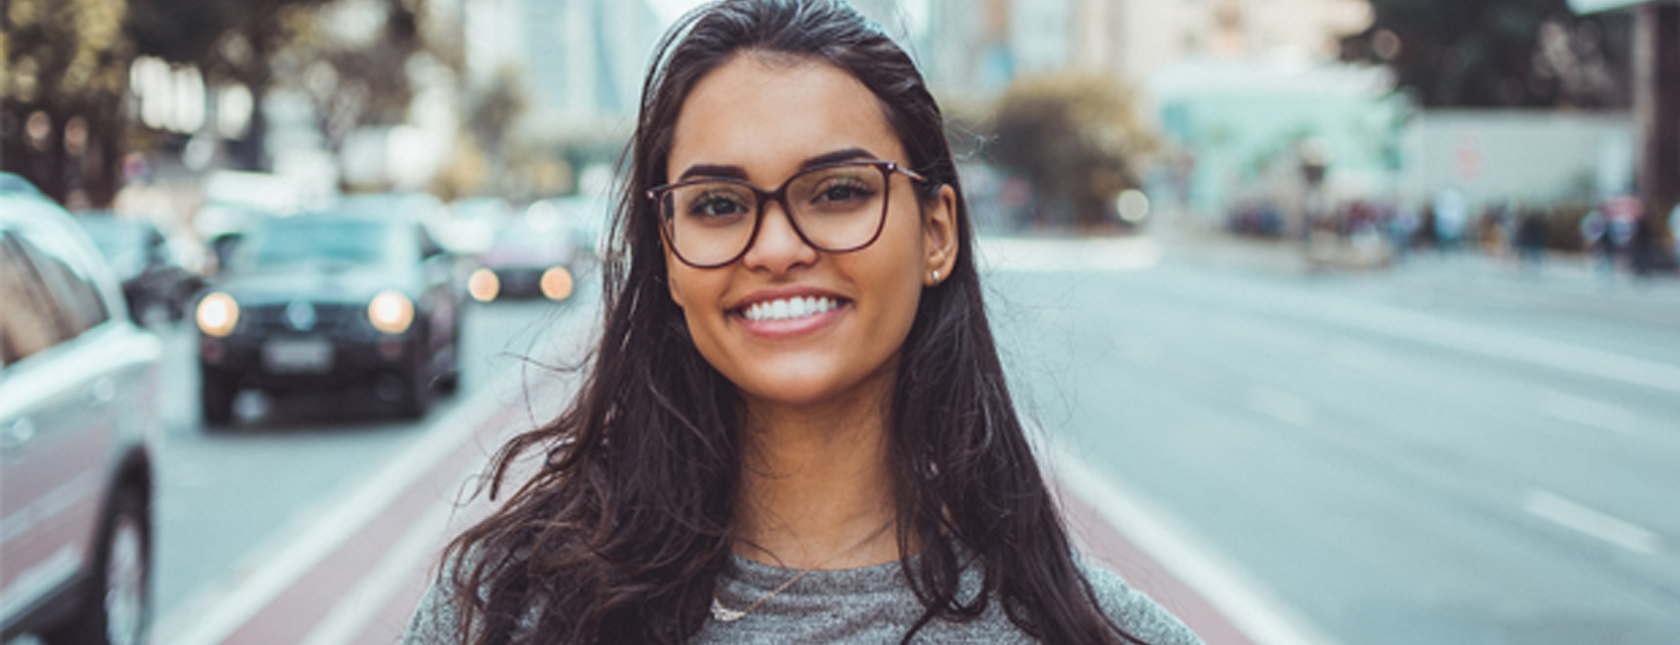 Woman in Glasses Smiling